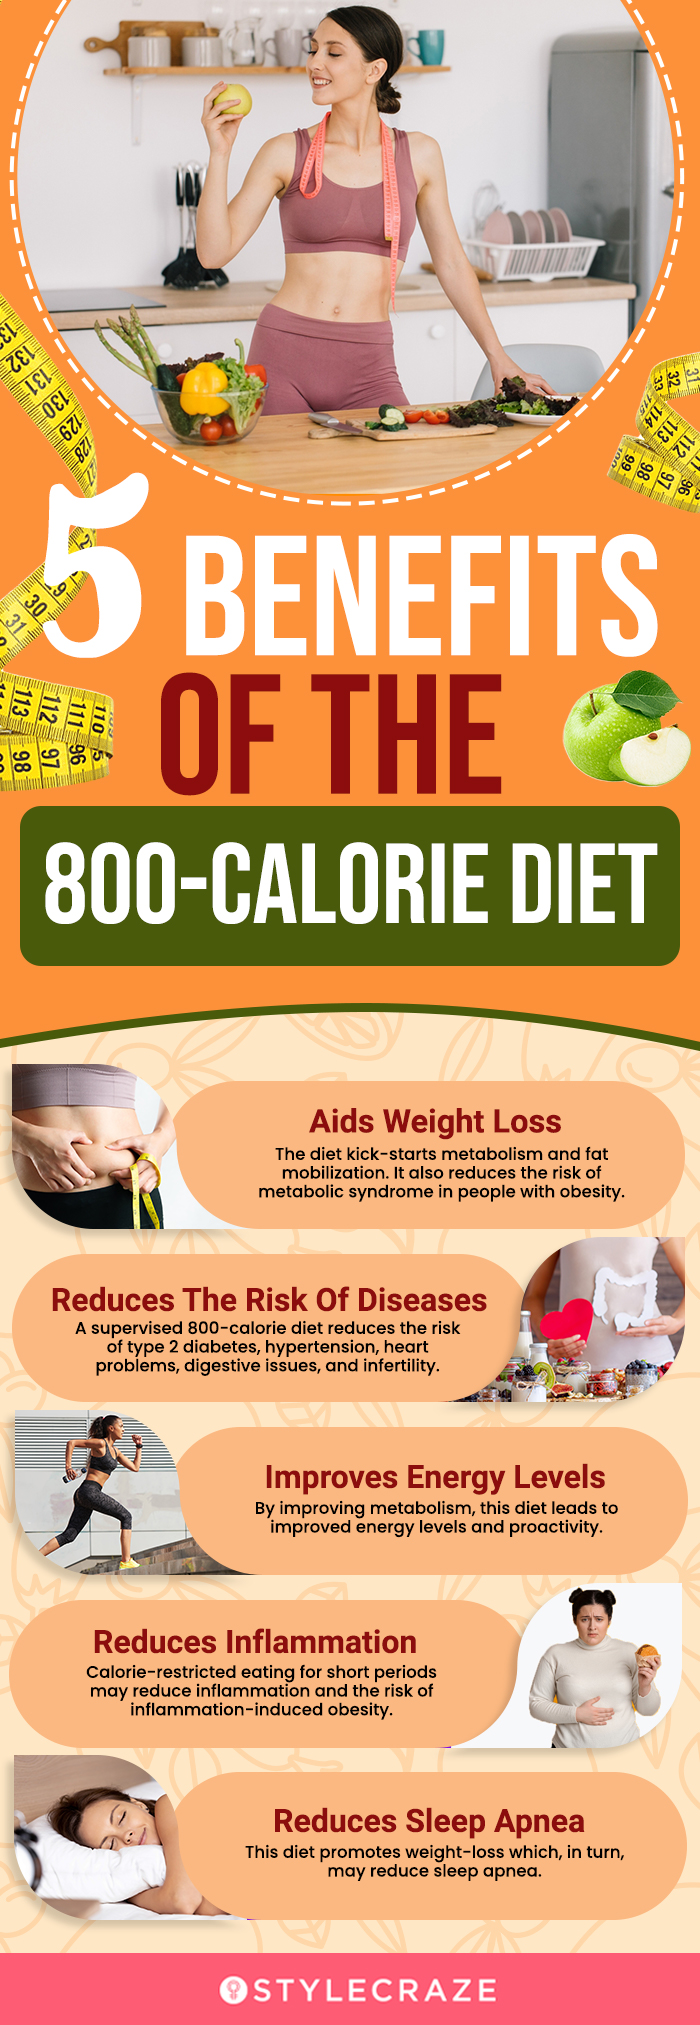 1200-Calorie Diet Plan: What To Eat, Exercises, And Benefits  